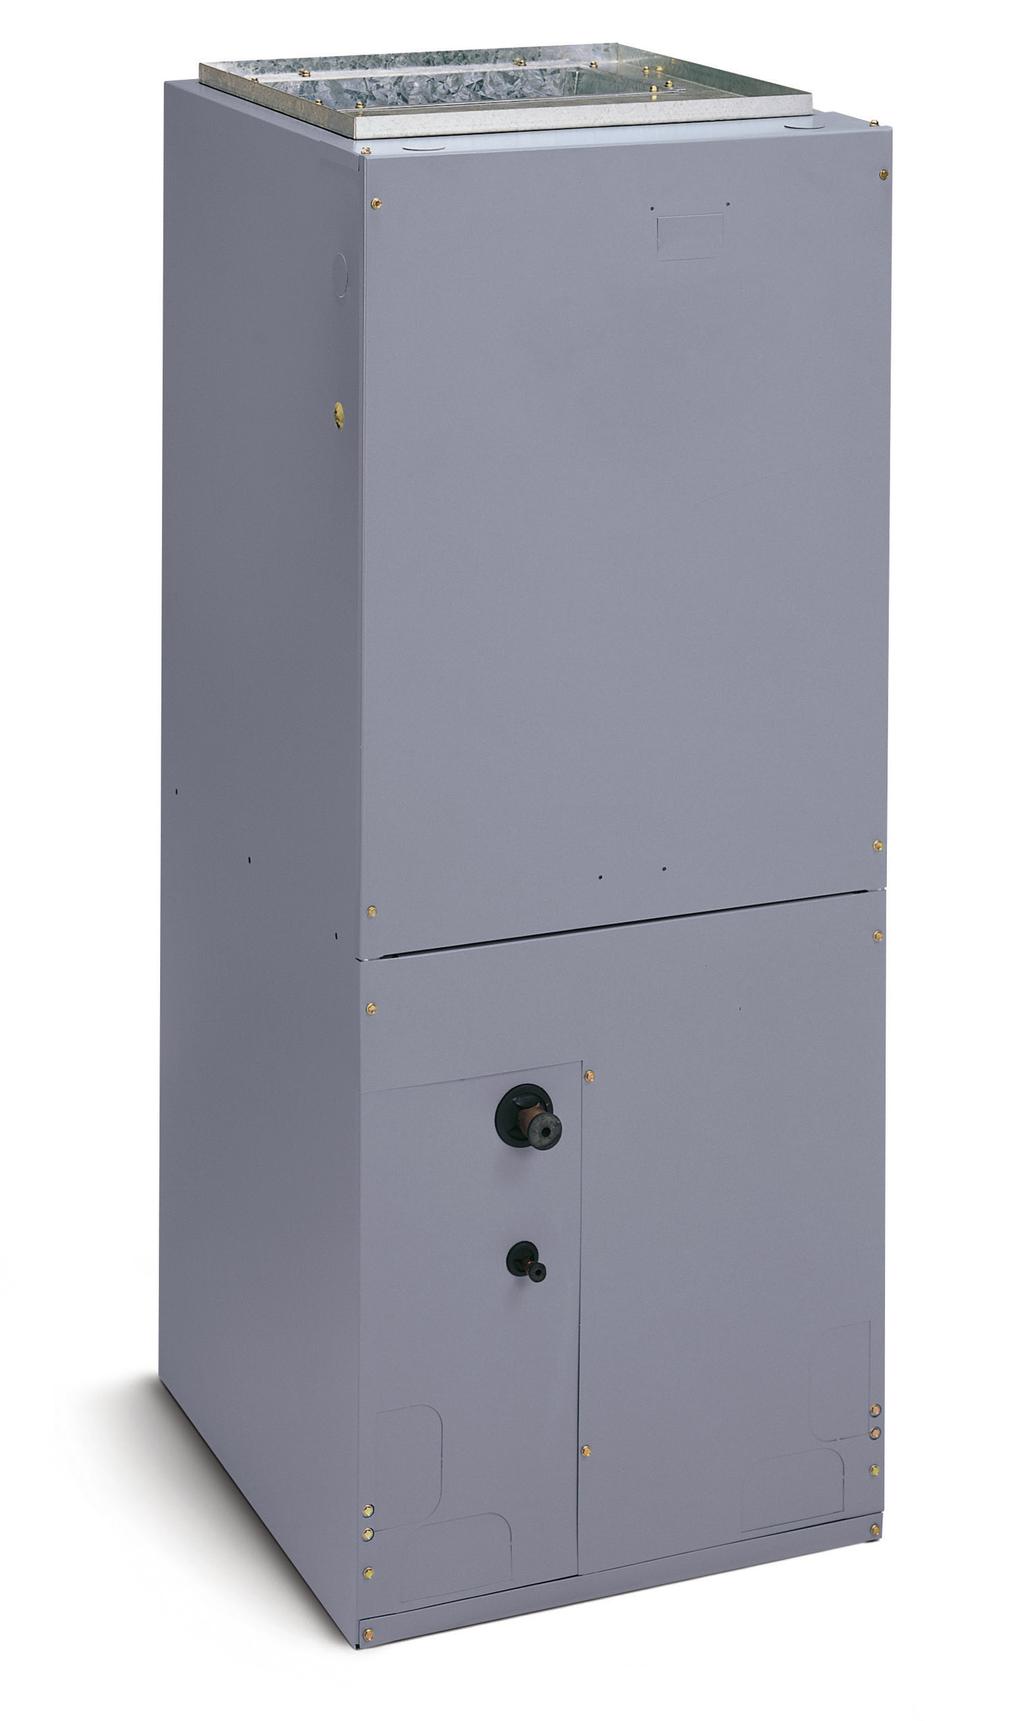 Product Specifications ENHANCED AIR HANDLER WITH VARIABLE SPEED APPLICATION 2-5 ton sizes Upflow and horizontal (counterflow capable with kit) Sequenced for demand management External access to